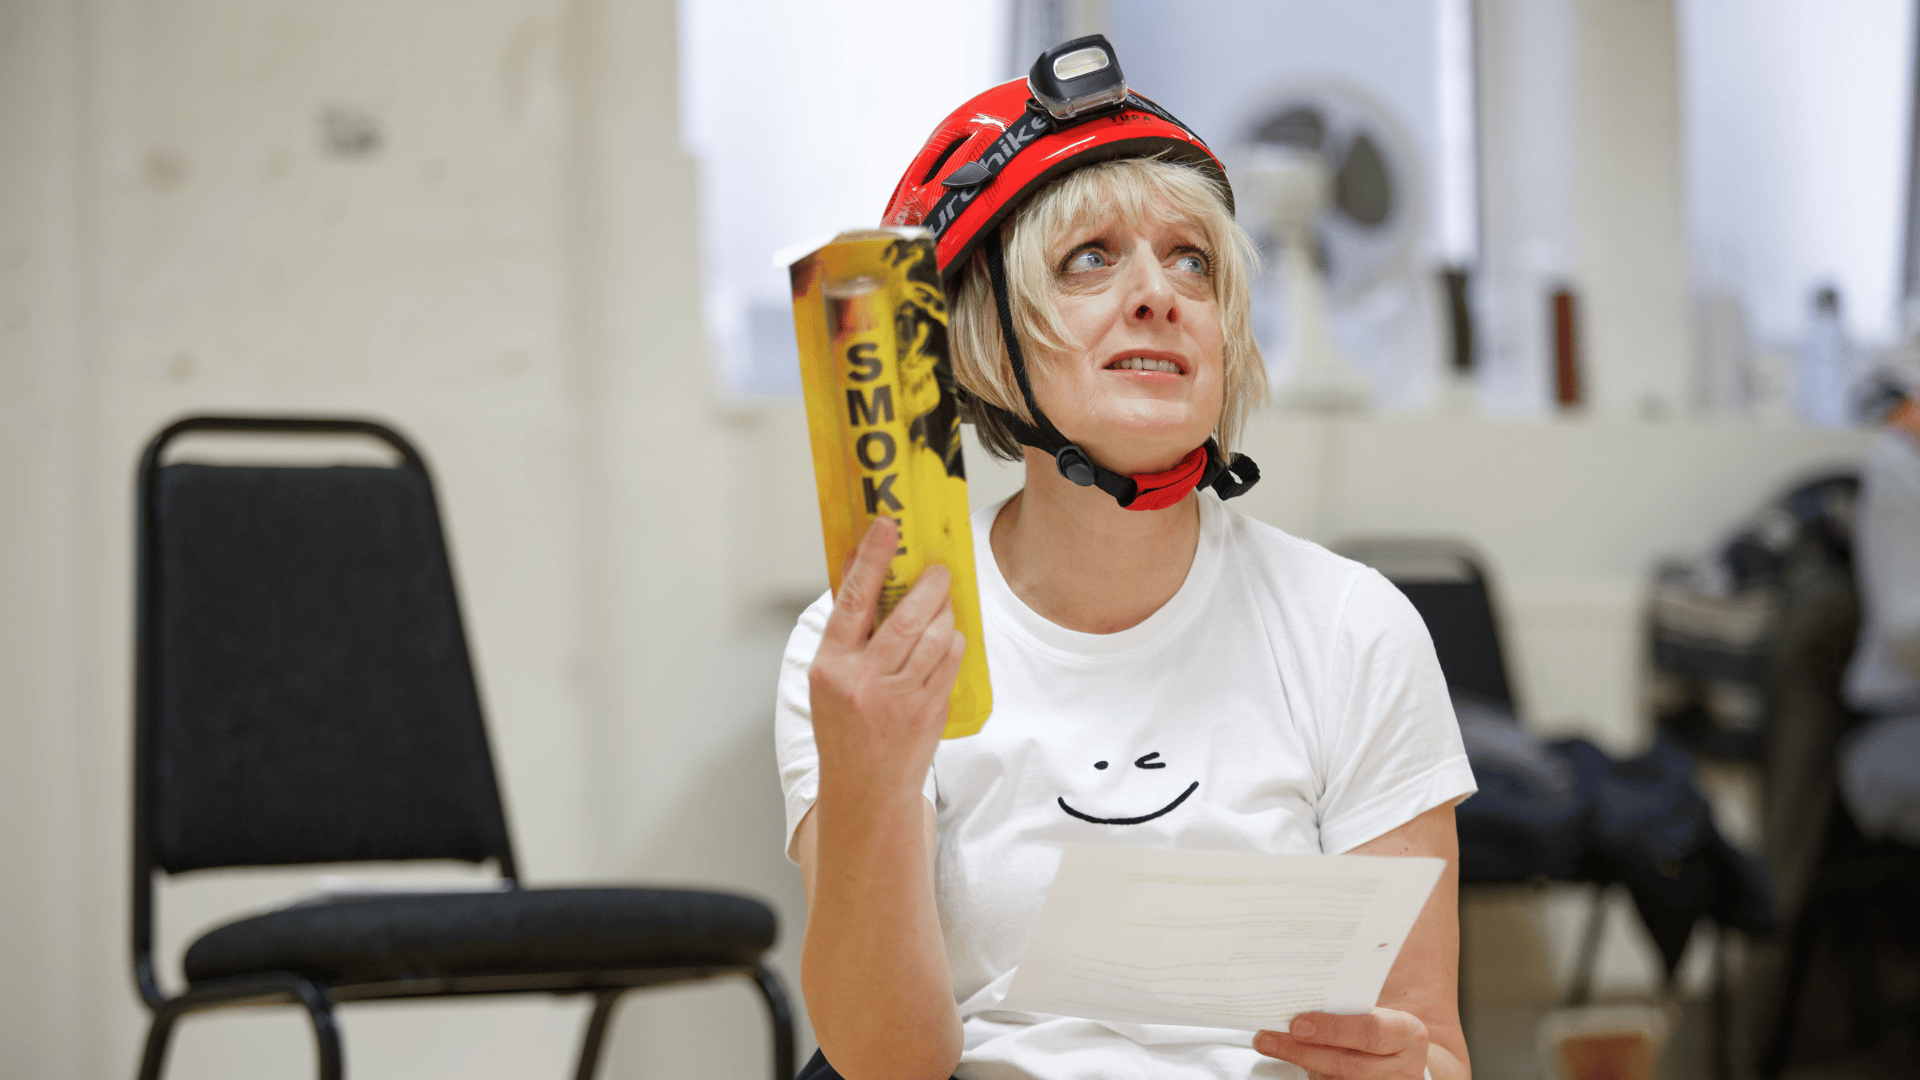 Sheila's Island Rehearsal image featuring Judy Flynn (Sheila) wearing a hard hat and holding a flare while looking confused